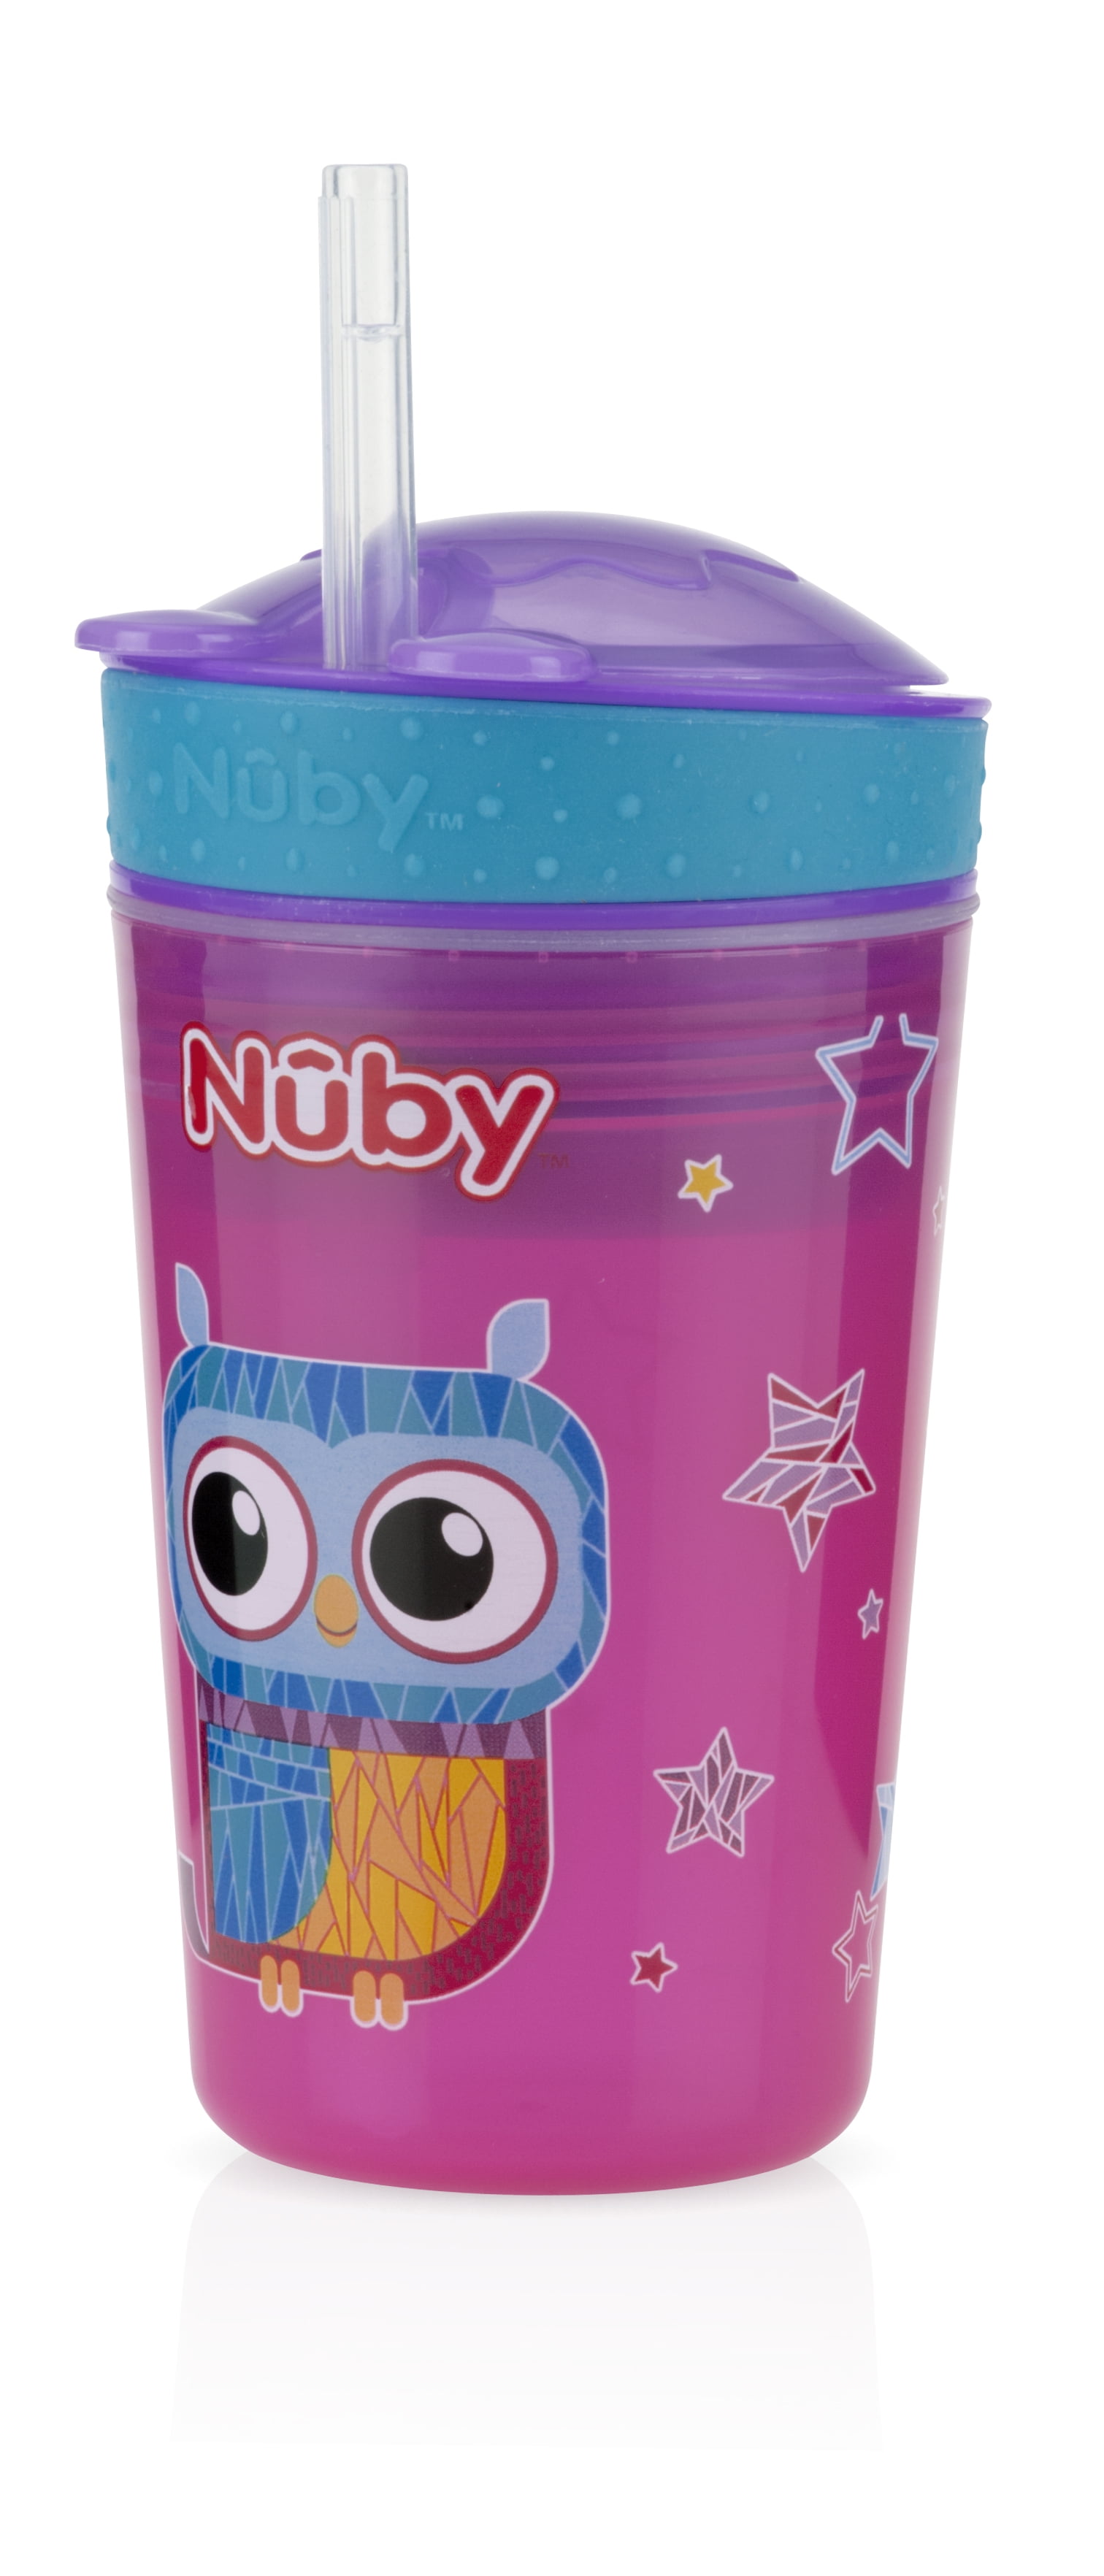 Red//Green 2 Pack Nuby Snack N Sip 2 in 1 Snack and Drink Cup,